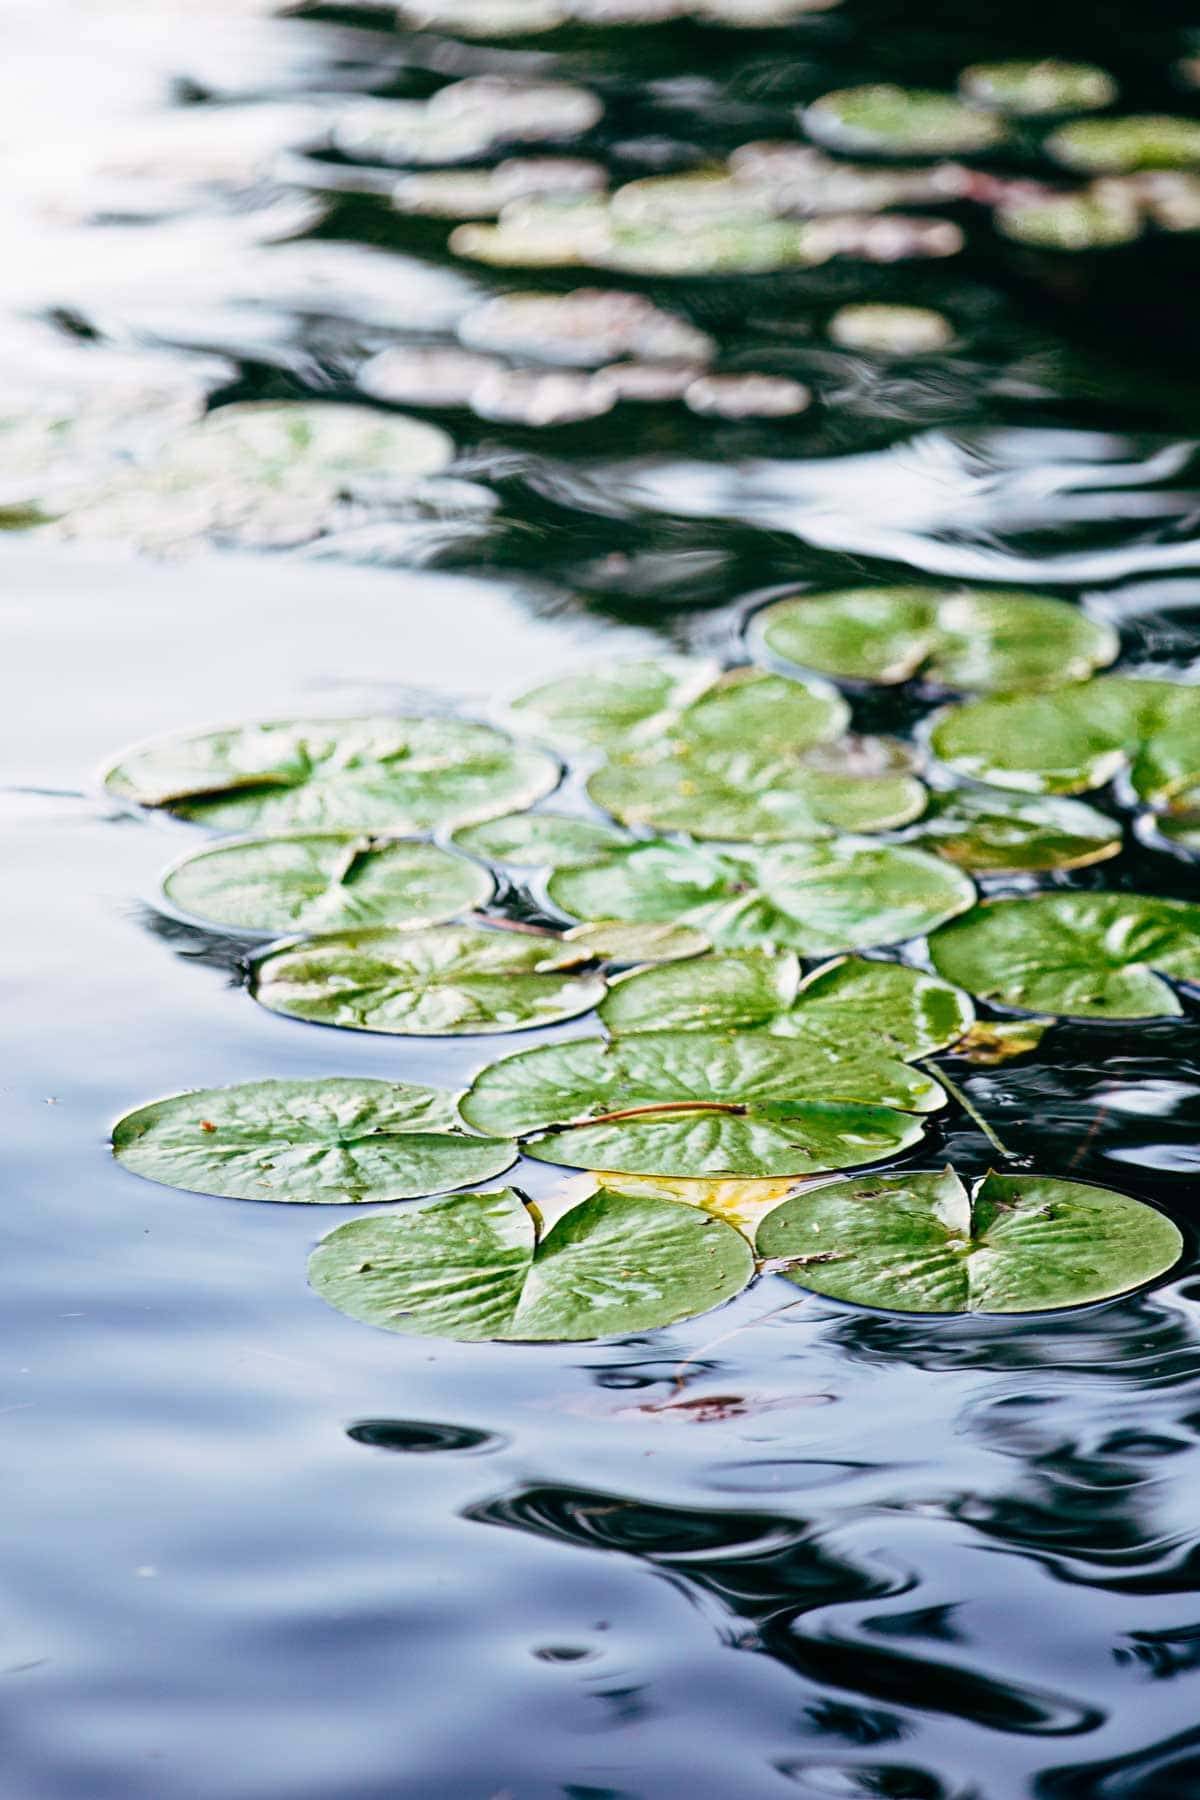 Lily pads on the water.